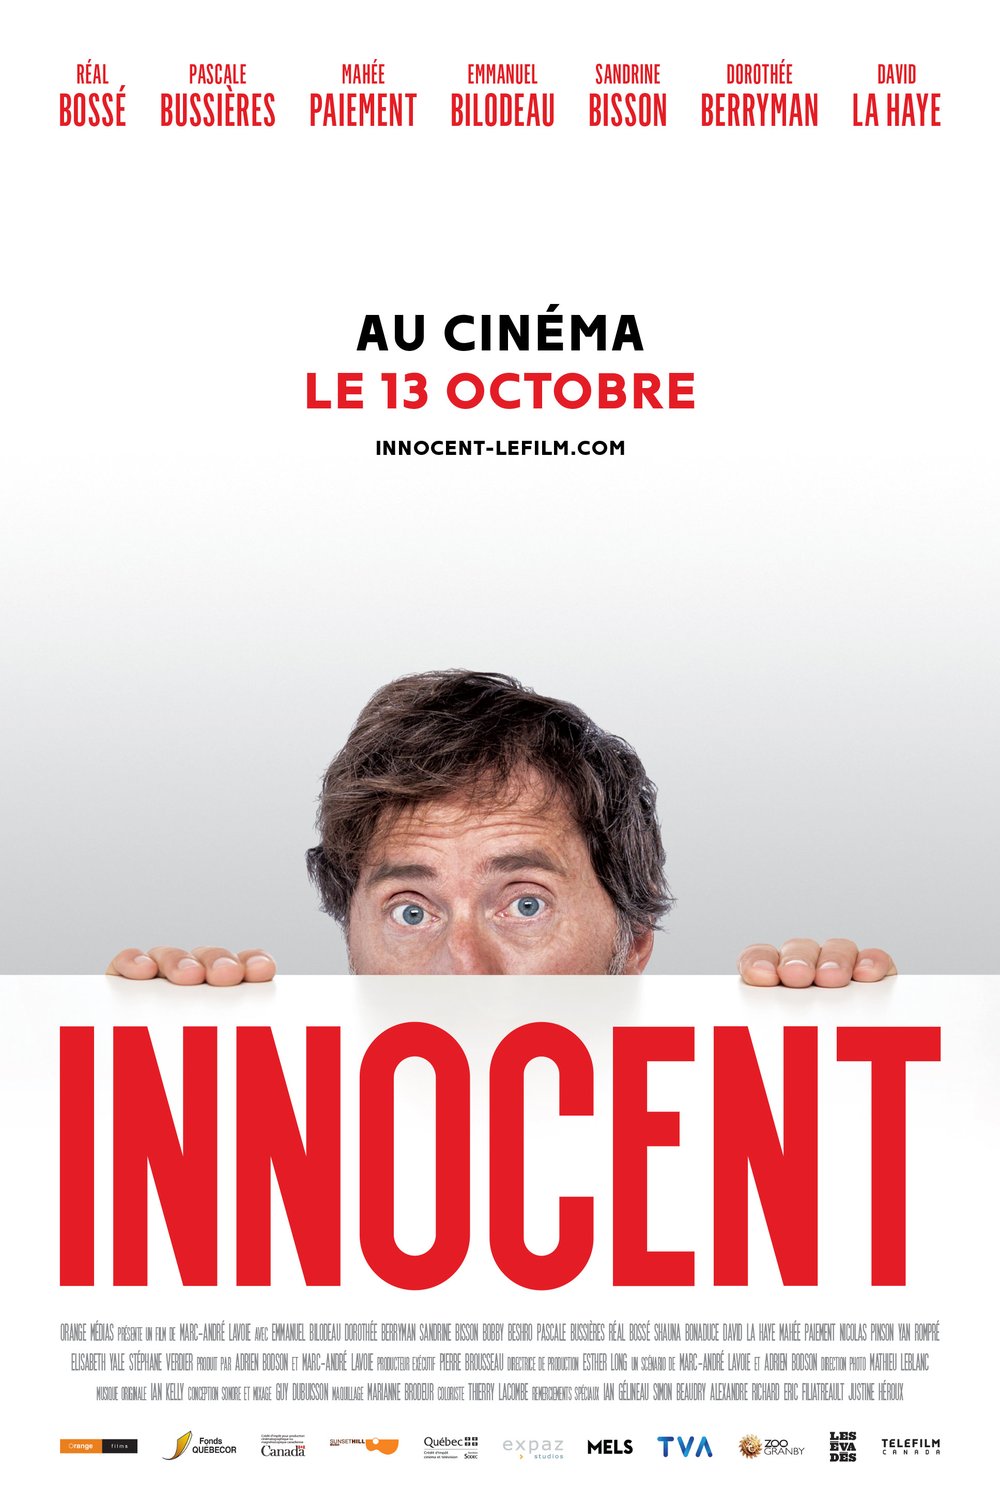 Poster of the movie Innocent